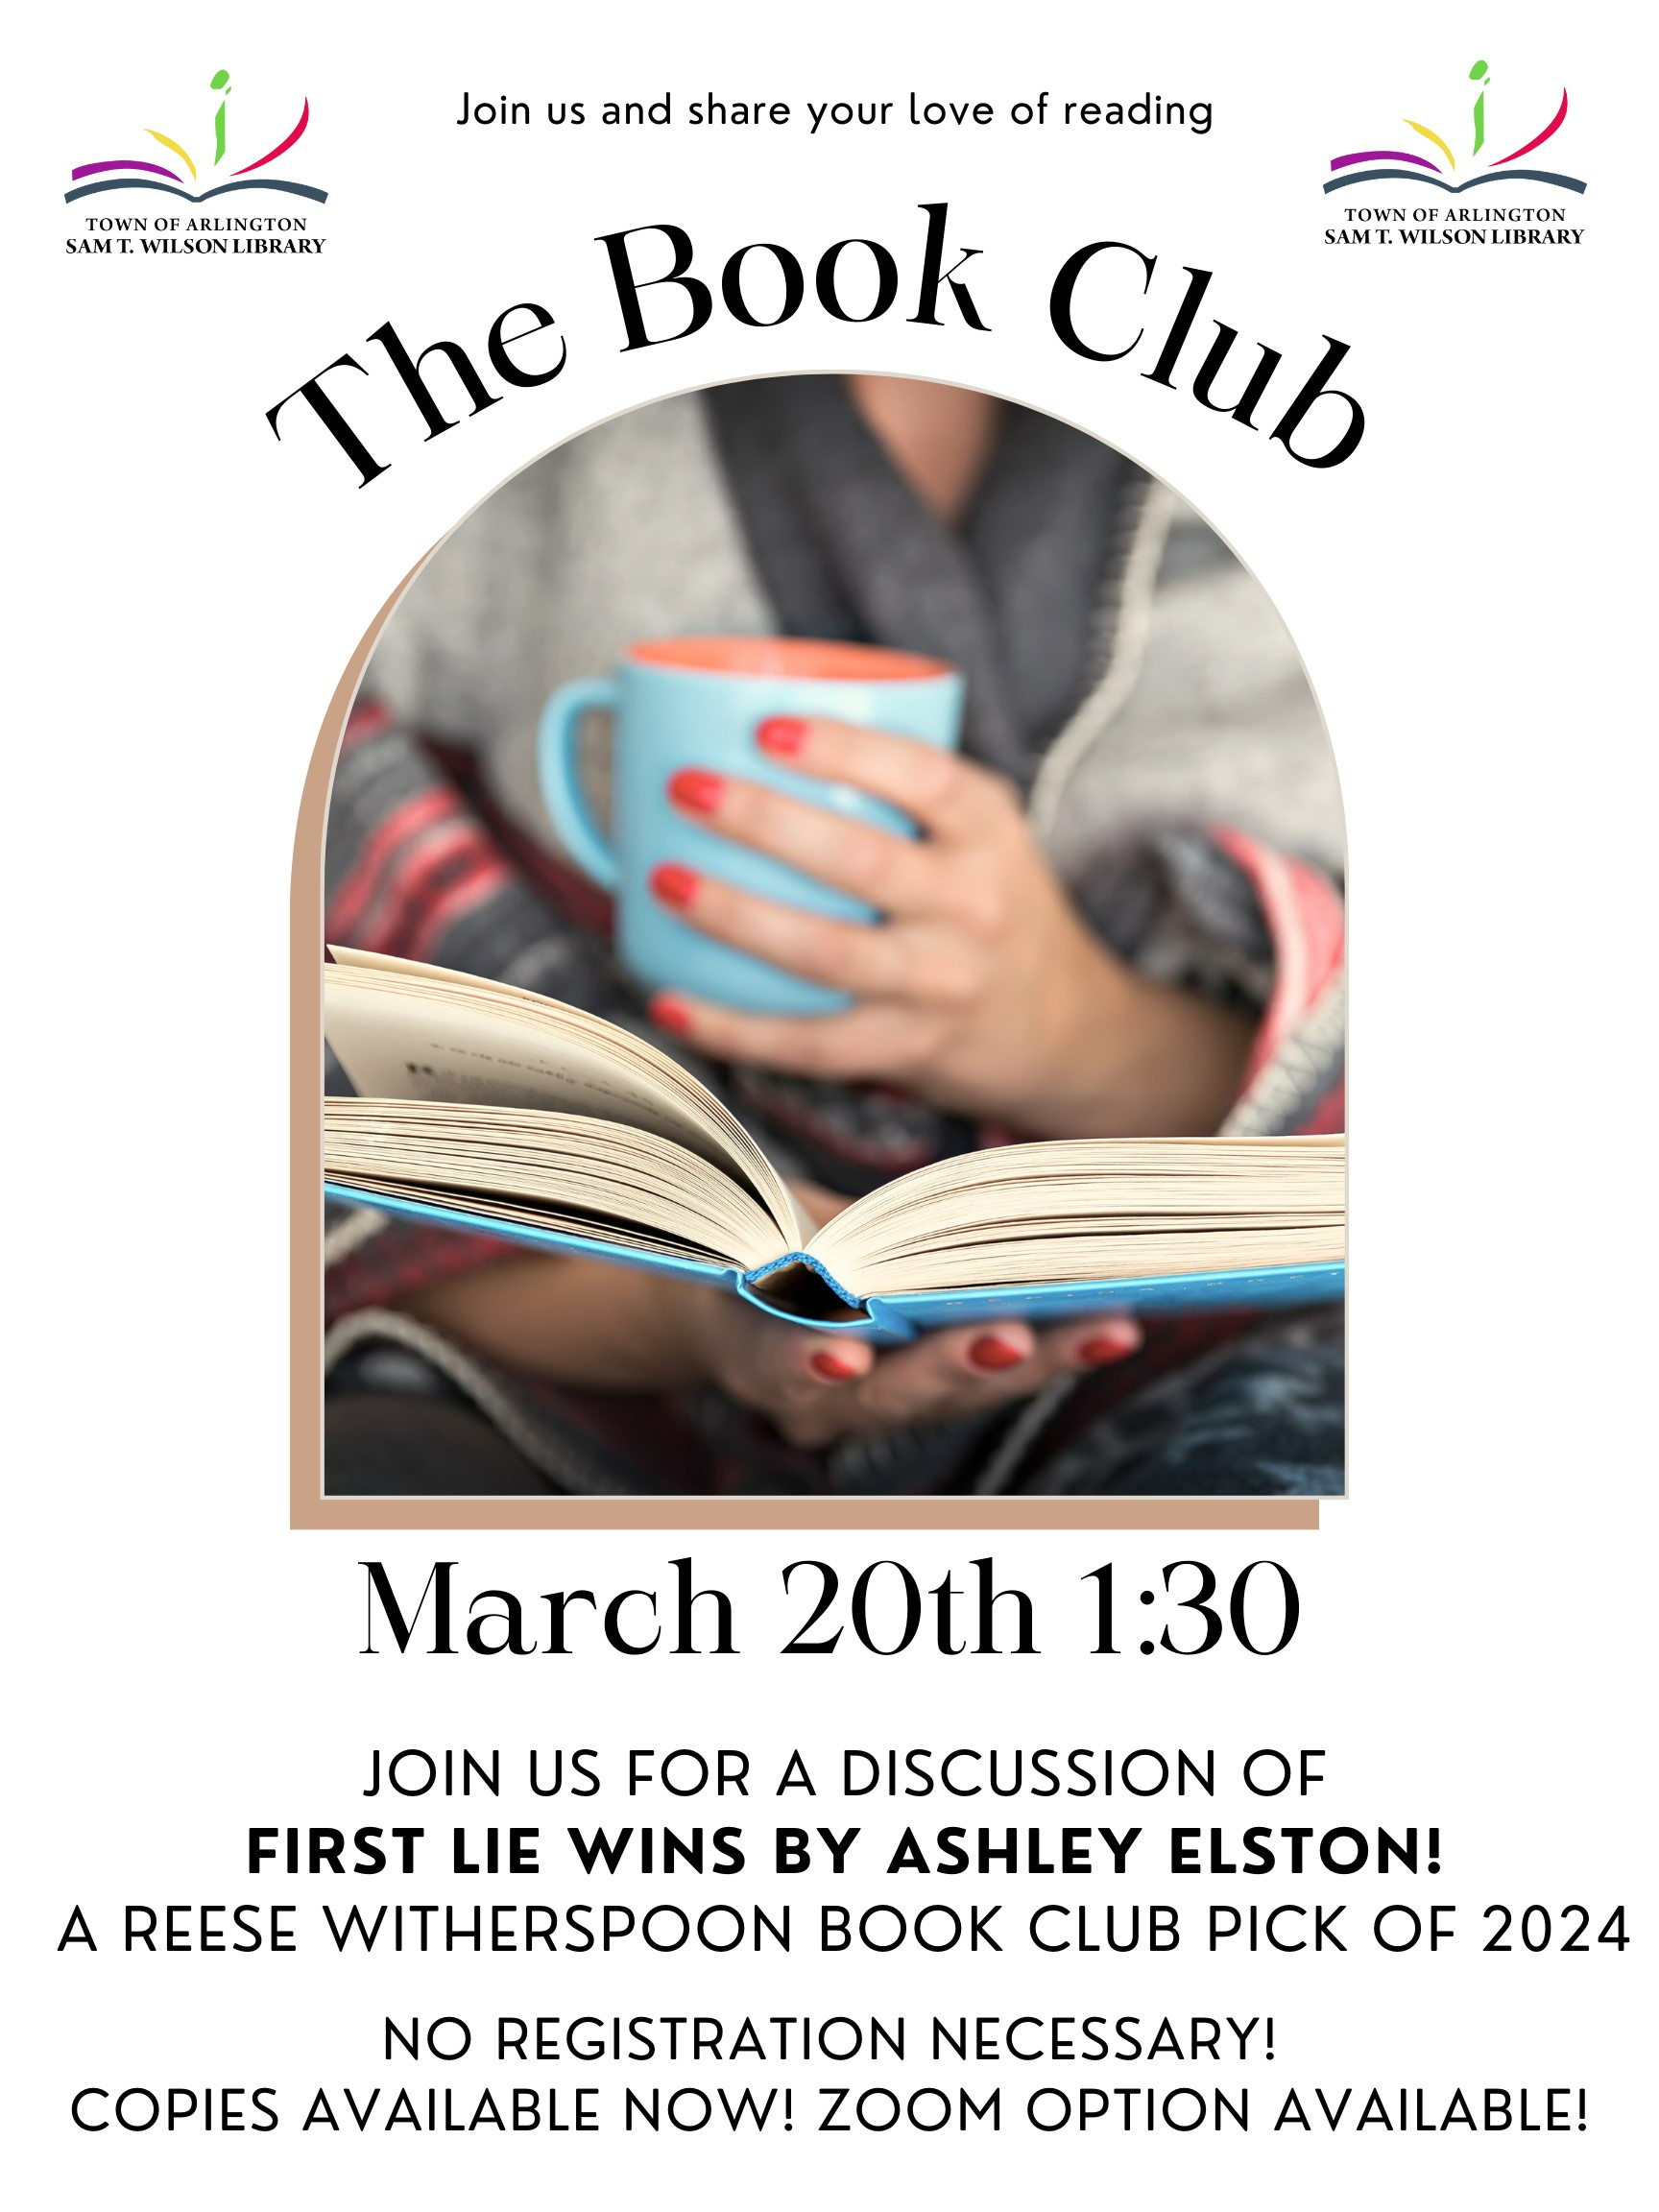 The Book Club, March 20th at 1:30 for discussion of First Lie Wins by Ashley Elston